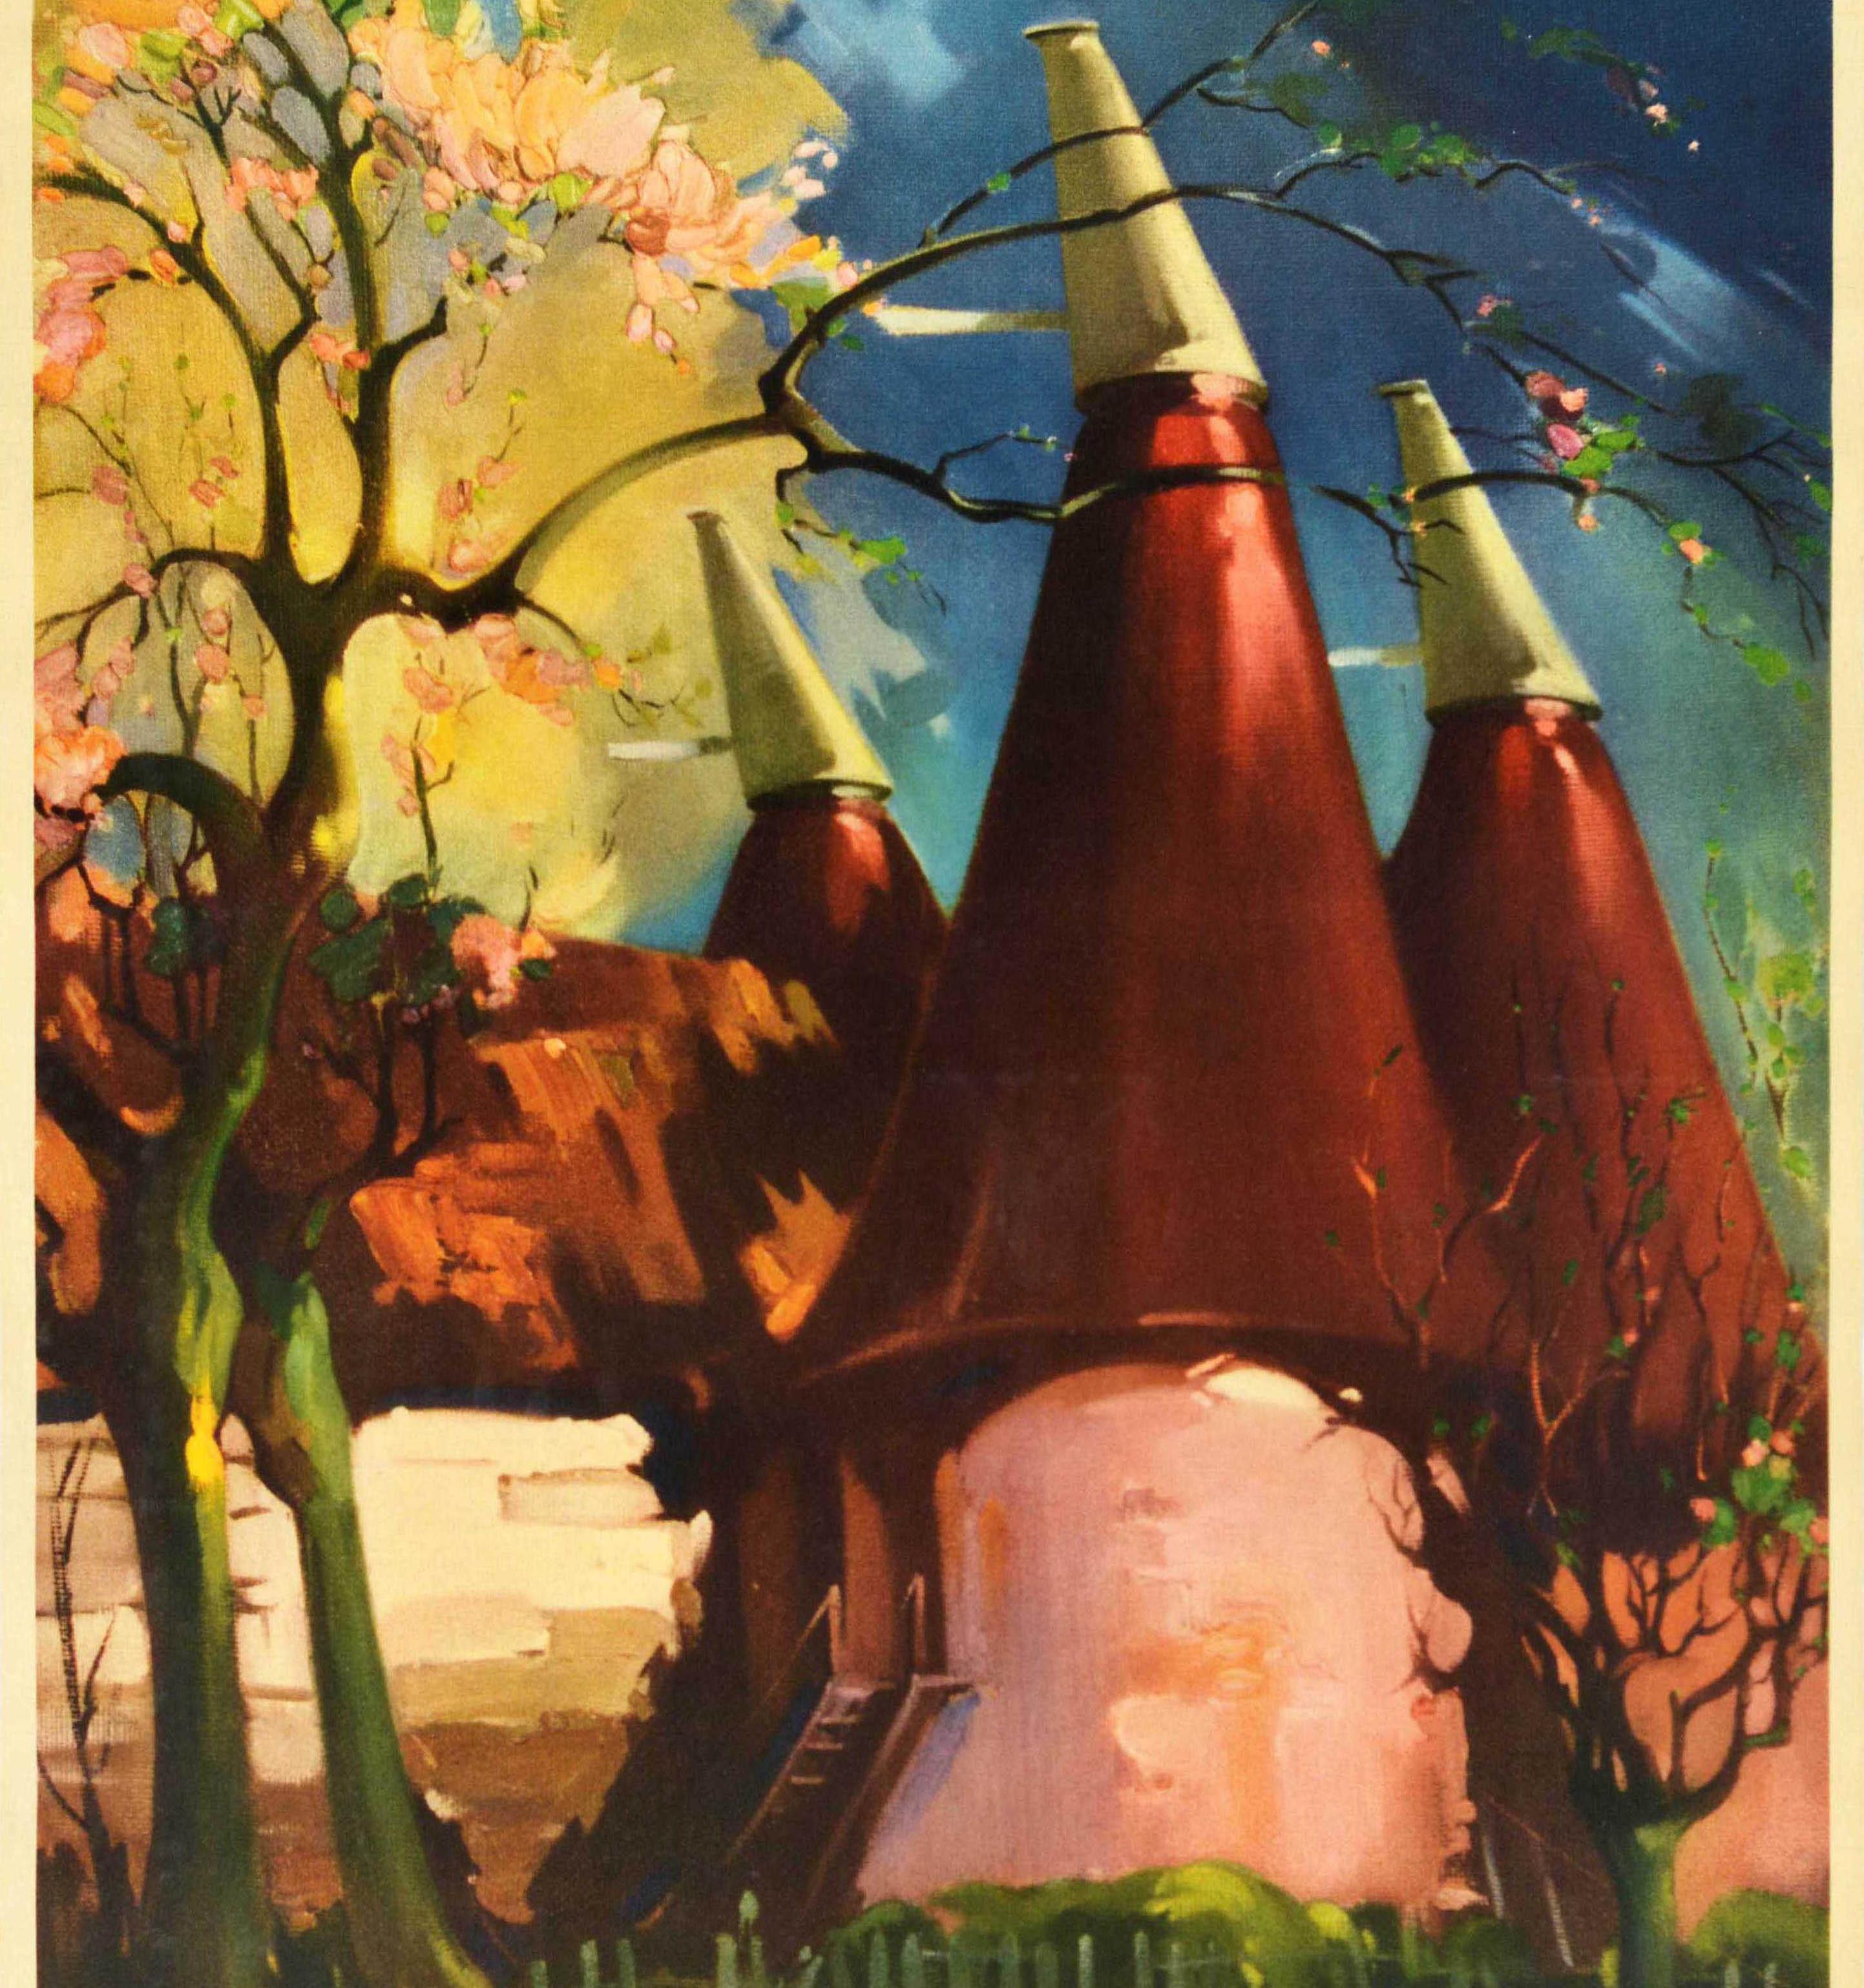 Original vintage travel poster for Kent served by British Railways featuring a colourful illustration by the notable painter and poster artist Claude Buckle (1905-1973) of traditional oast houses and flowering trees in spring bloom with the title in